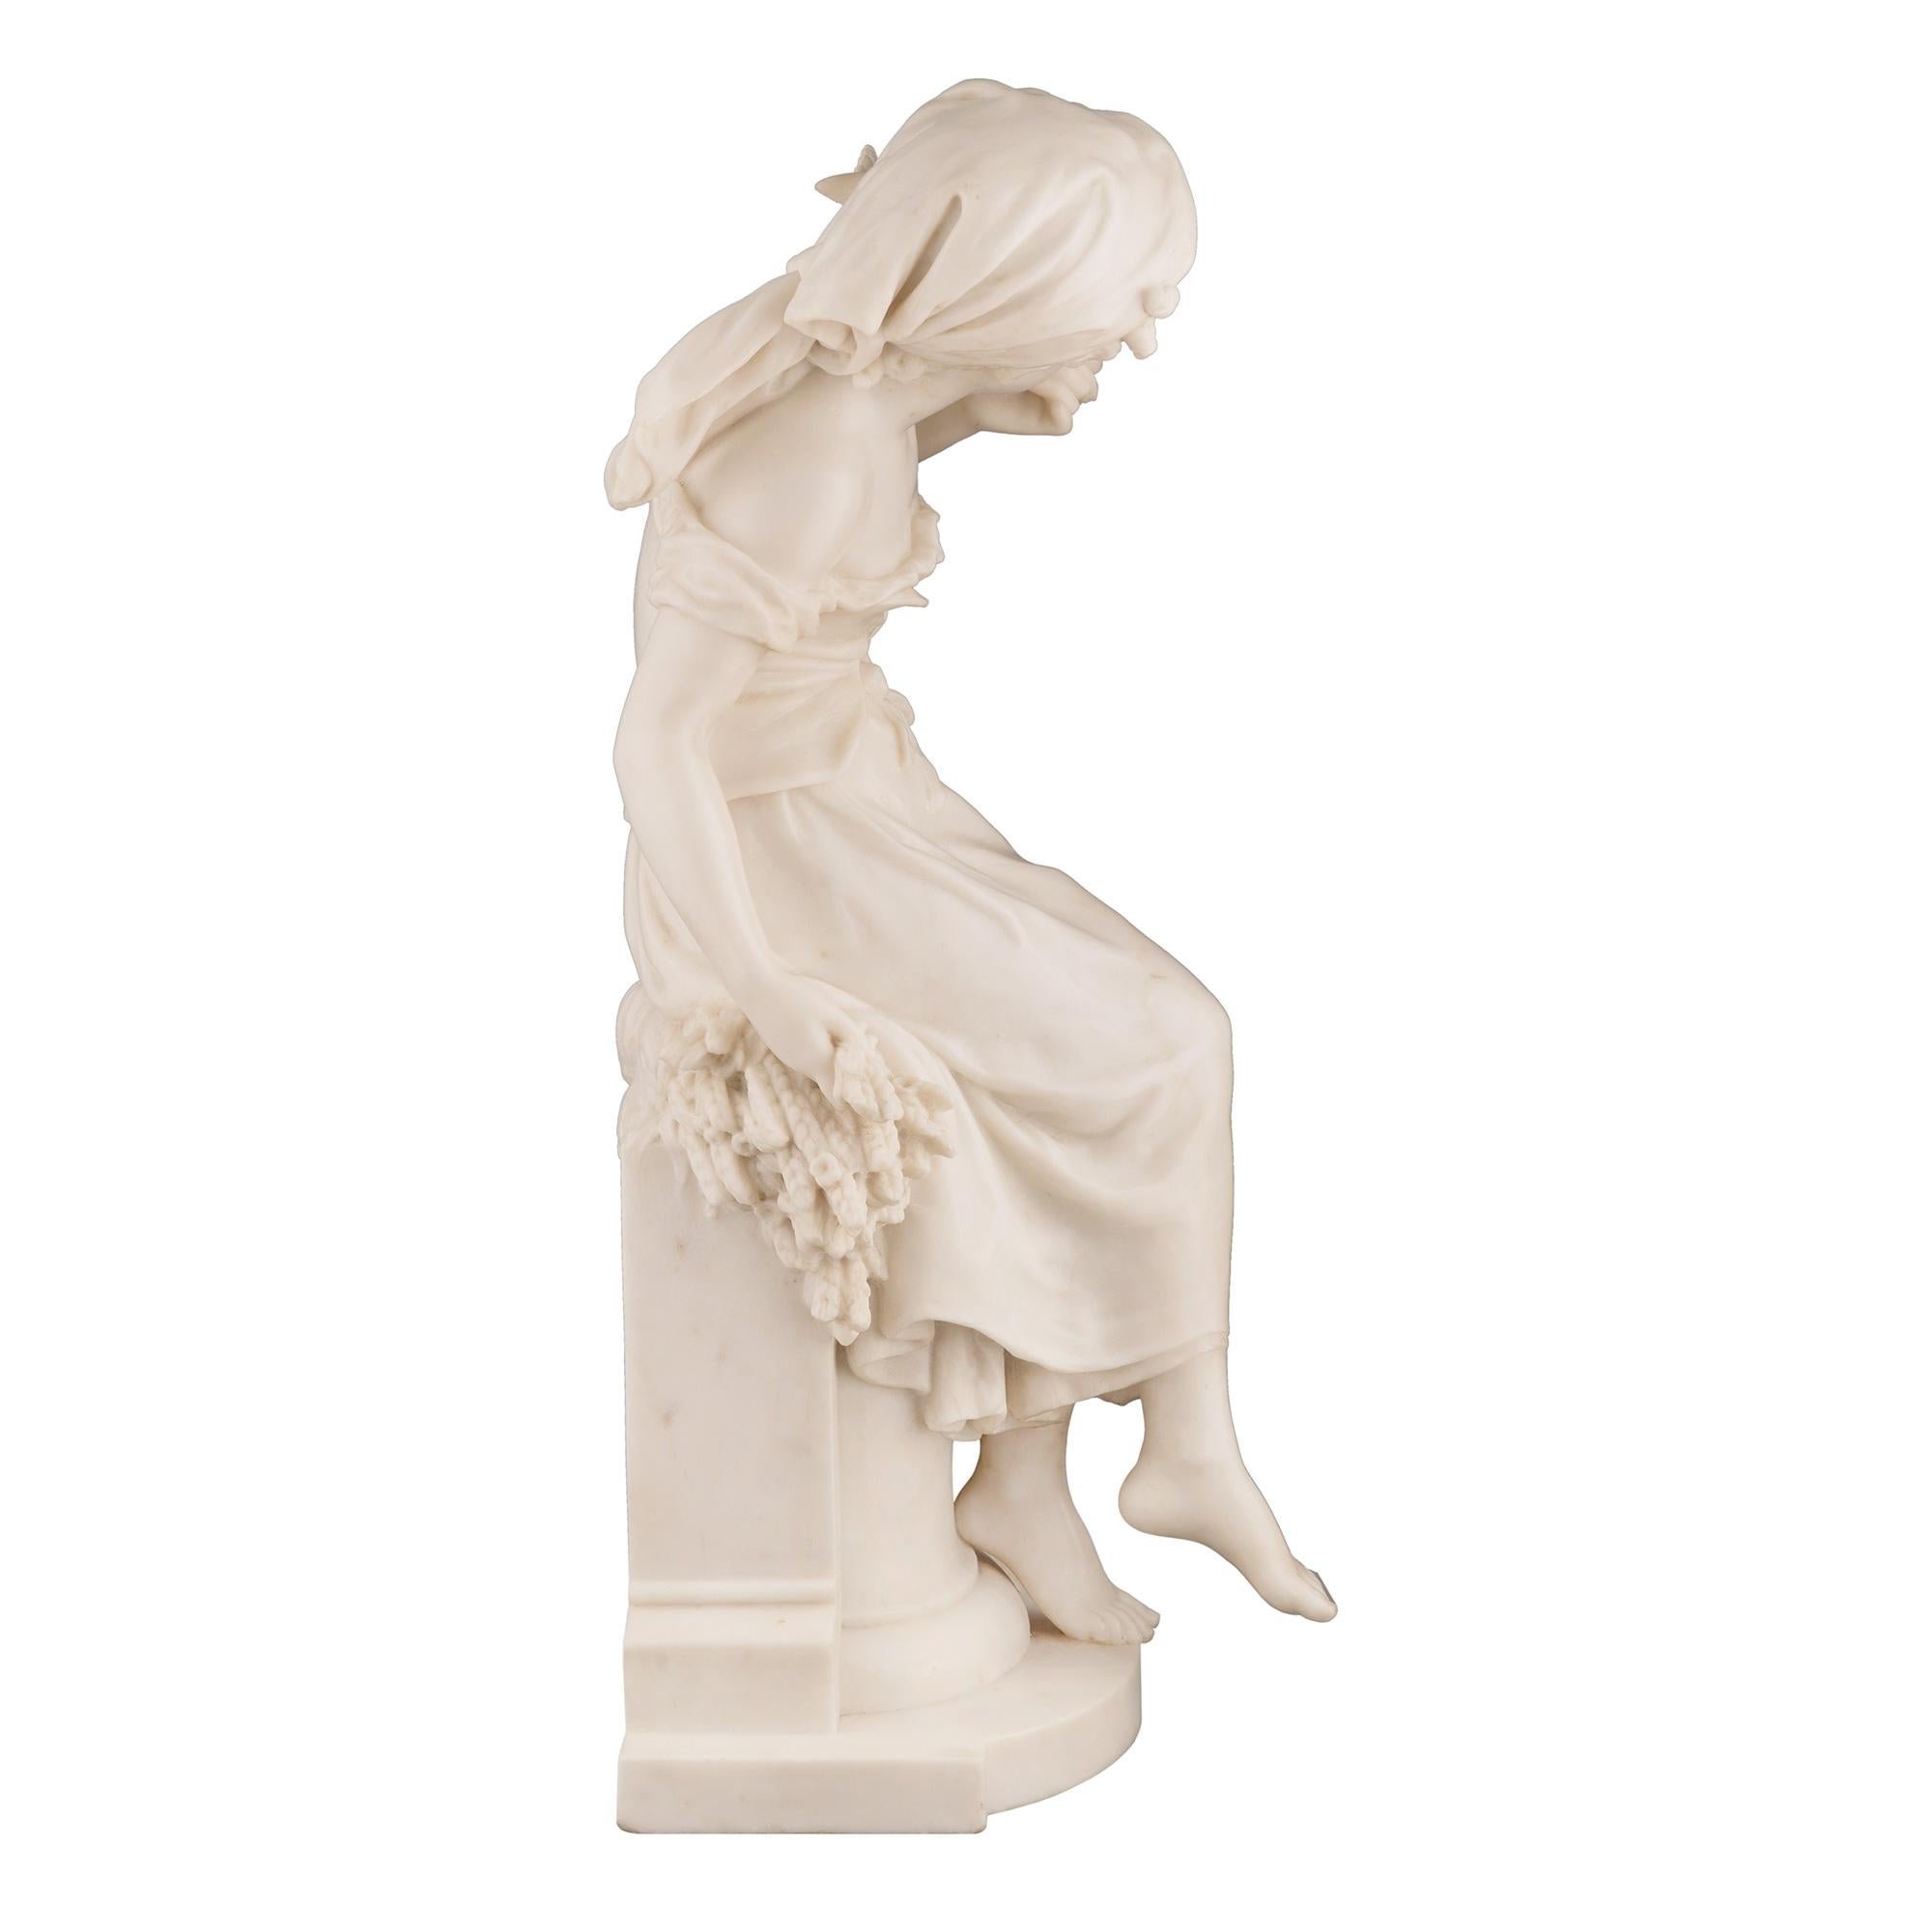 A stunning French 19th century white Carrara marble statue of a beautiful young maiden, signed Math Moreau. The statue is raised by a demi lune shaped tier with an elegant pedestal displaying a mottled border with a sickle and tied wheat sprigs at